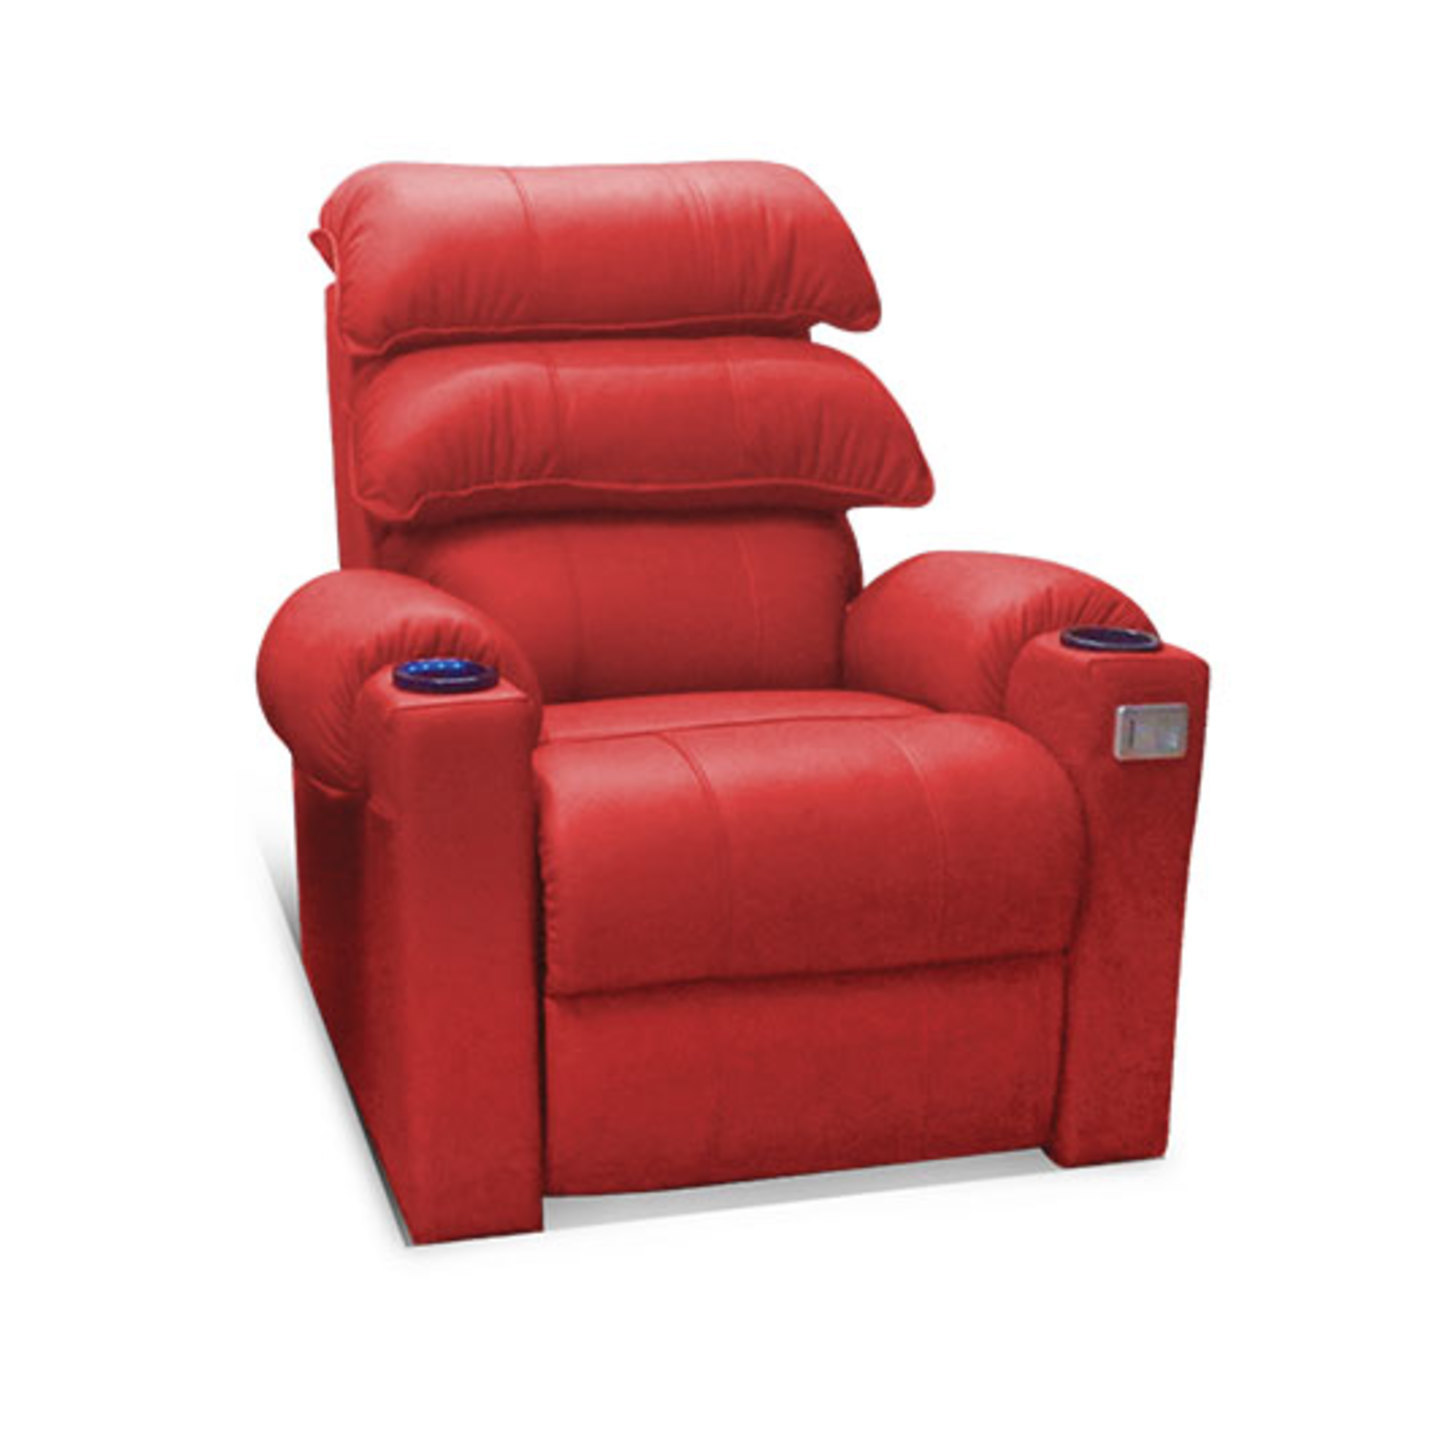 LN Recliner Chair Luxe Manual System In Red Colour